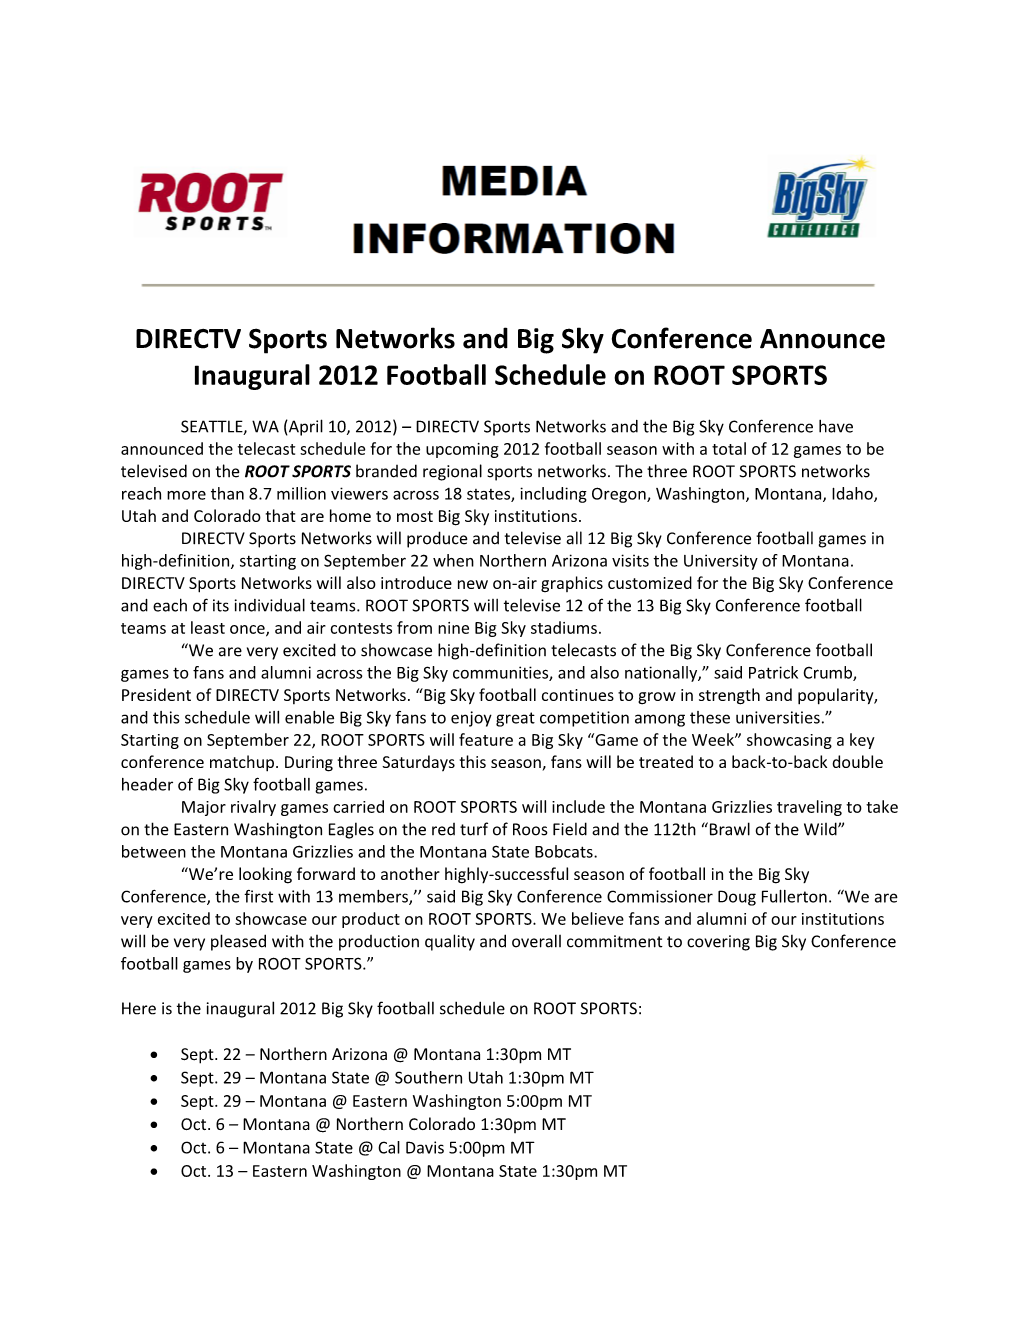 DIRECTV Sports Networks and Big Sky Conference Announce Inaugural 2012 Football Schedule on ROOT SPORTS